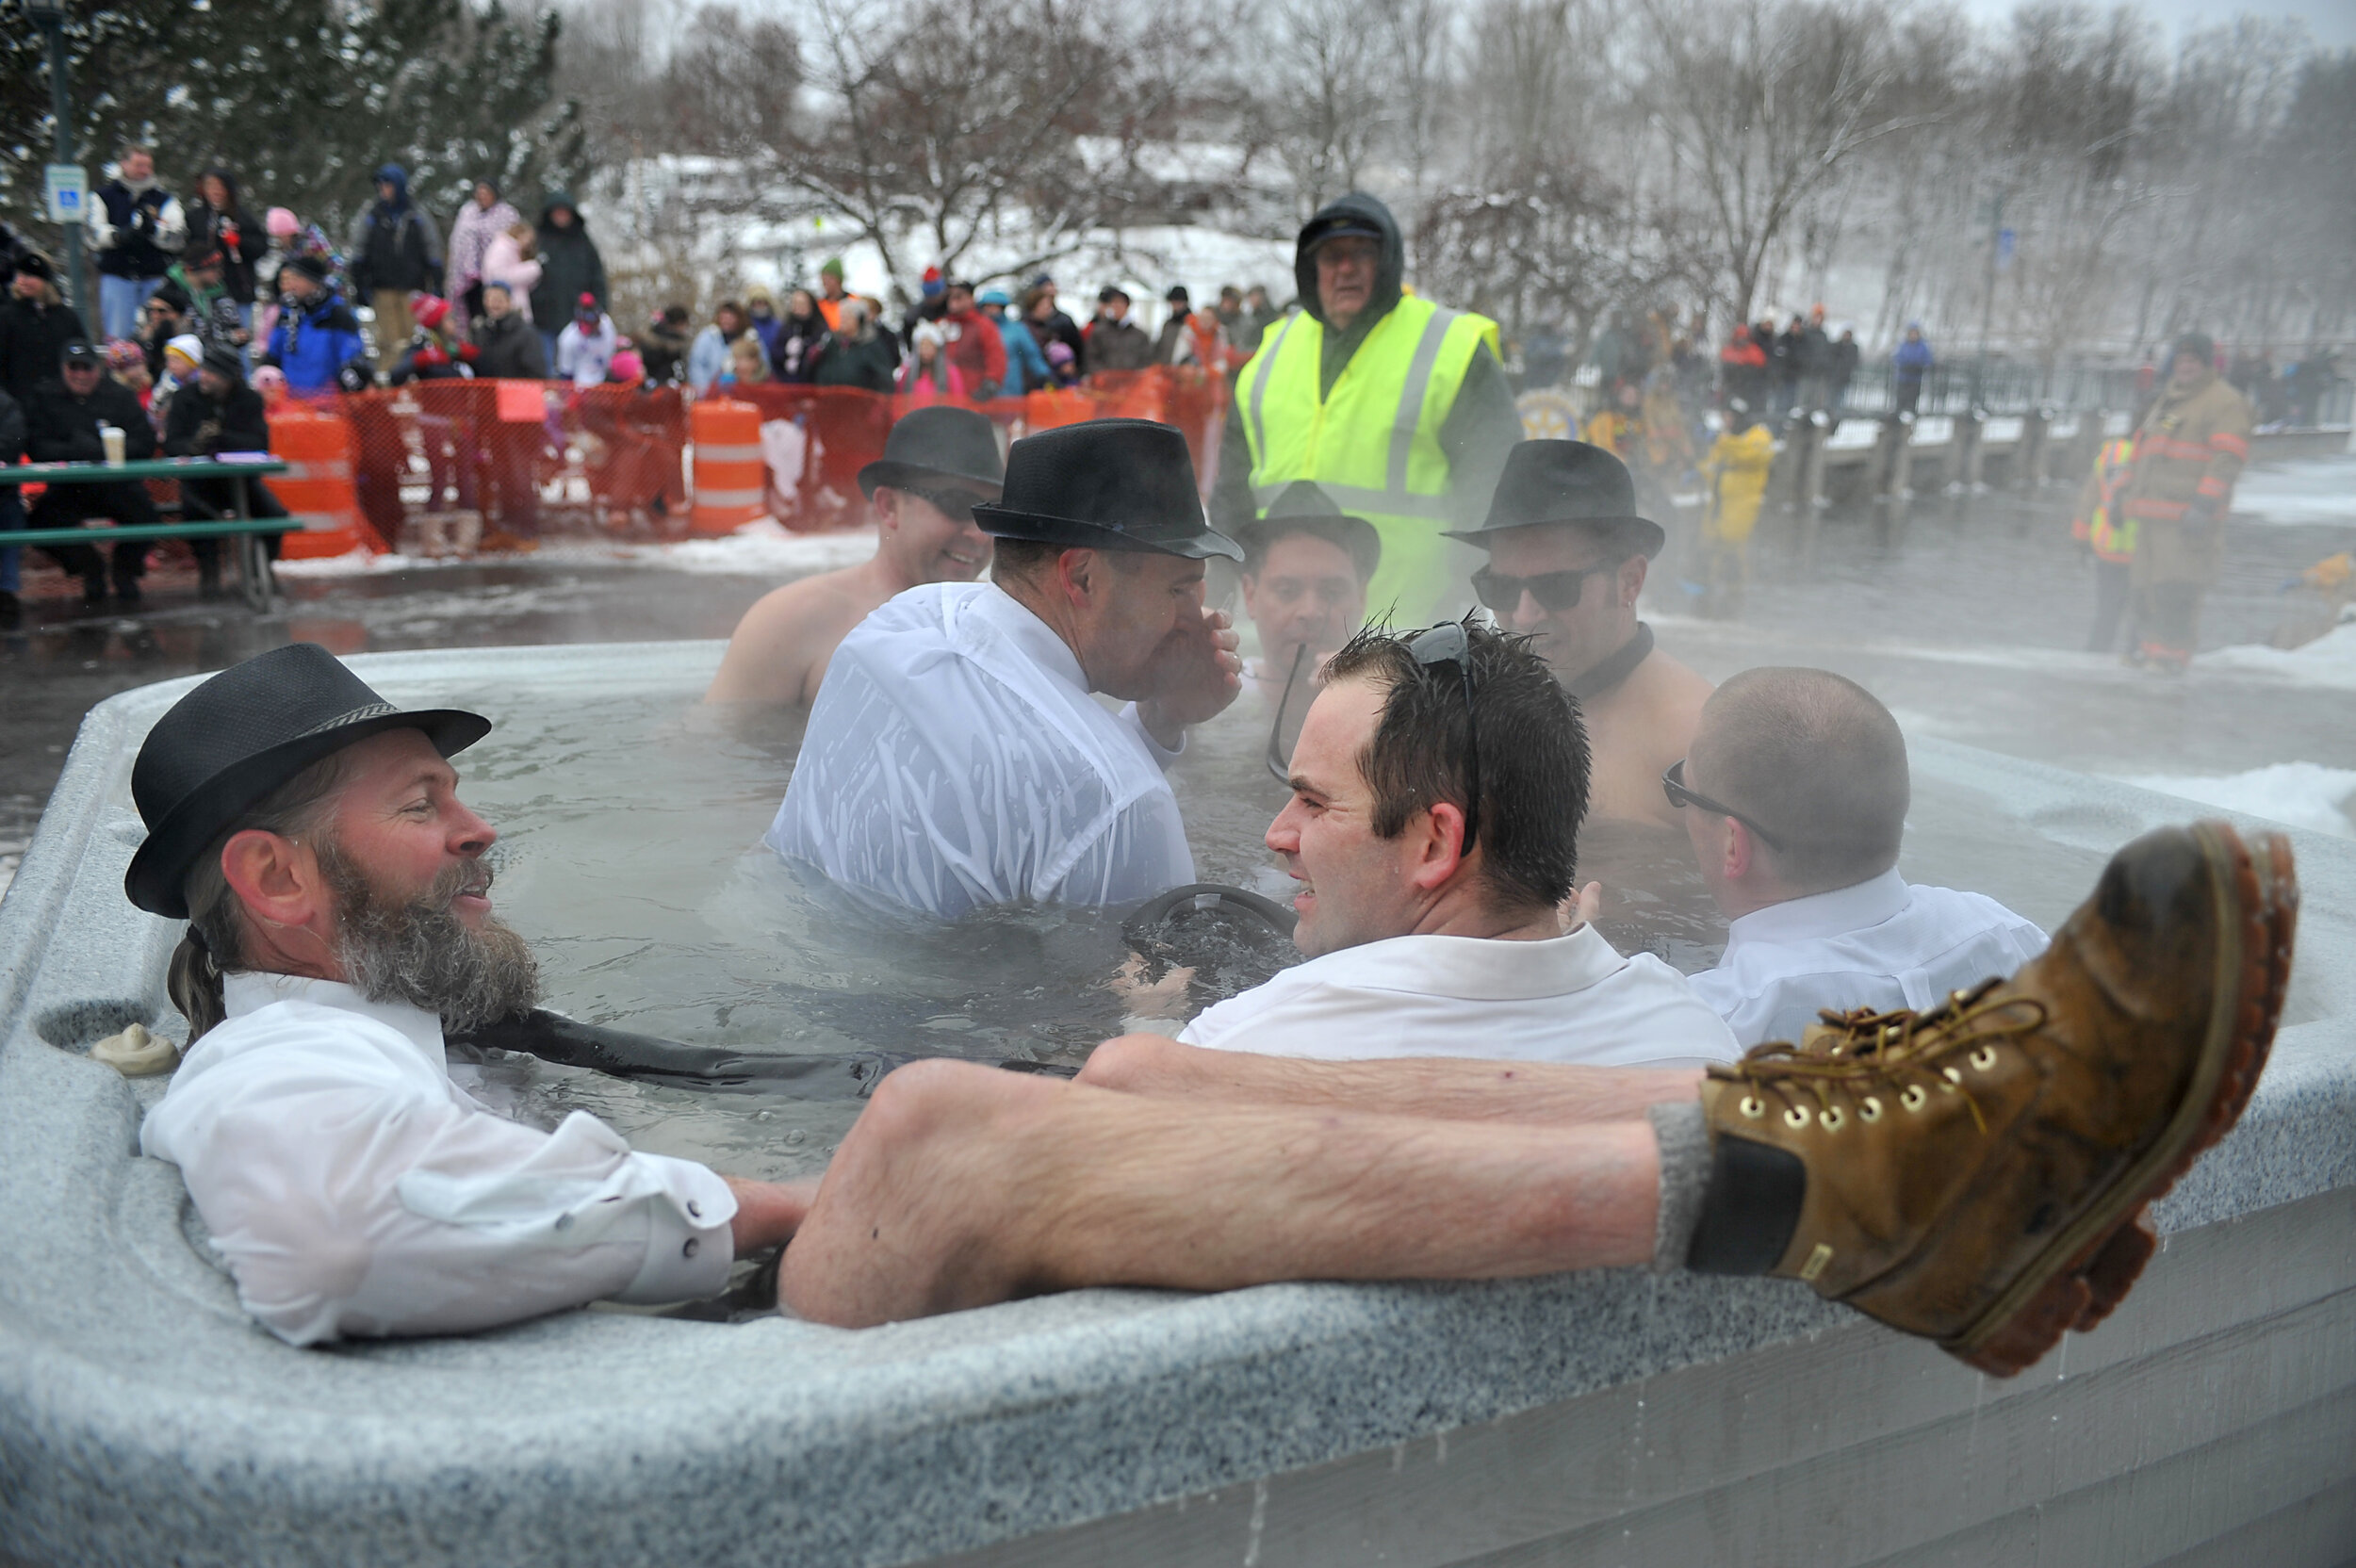  Not wanting to take off his boots, Scott Galloway relaxes with his feet kicked up on the hot tub after battling the near-zero temperatures while participating in the Sweetheart Splash Saturday, Feb. 11, in Rockford. 